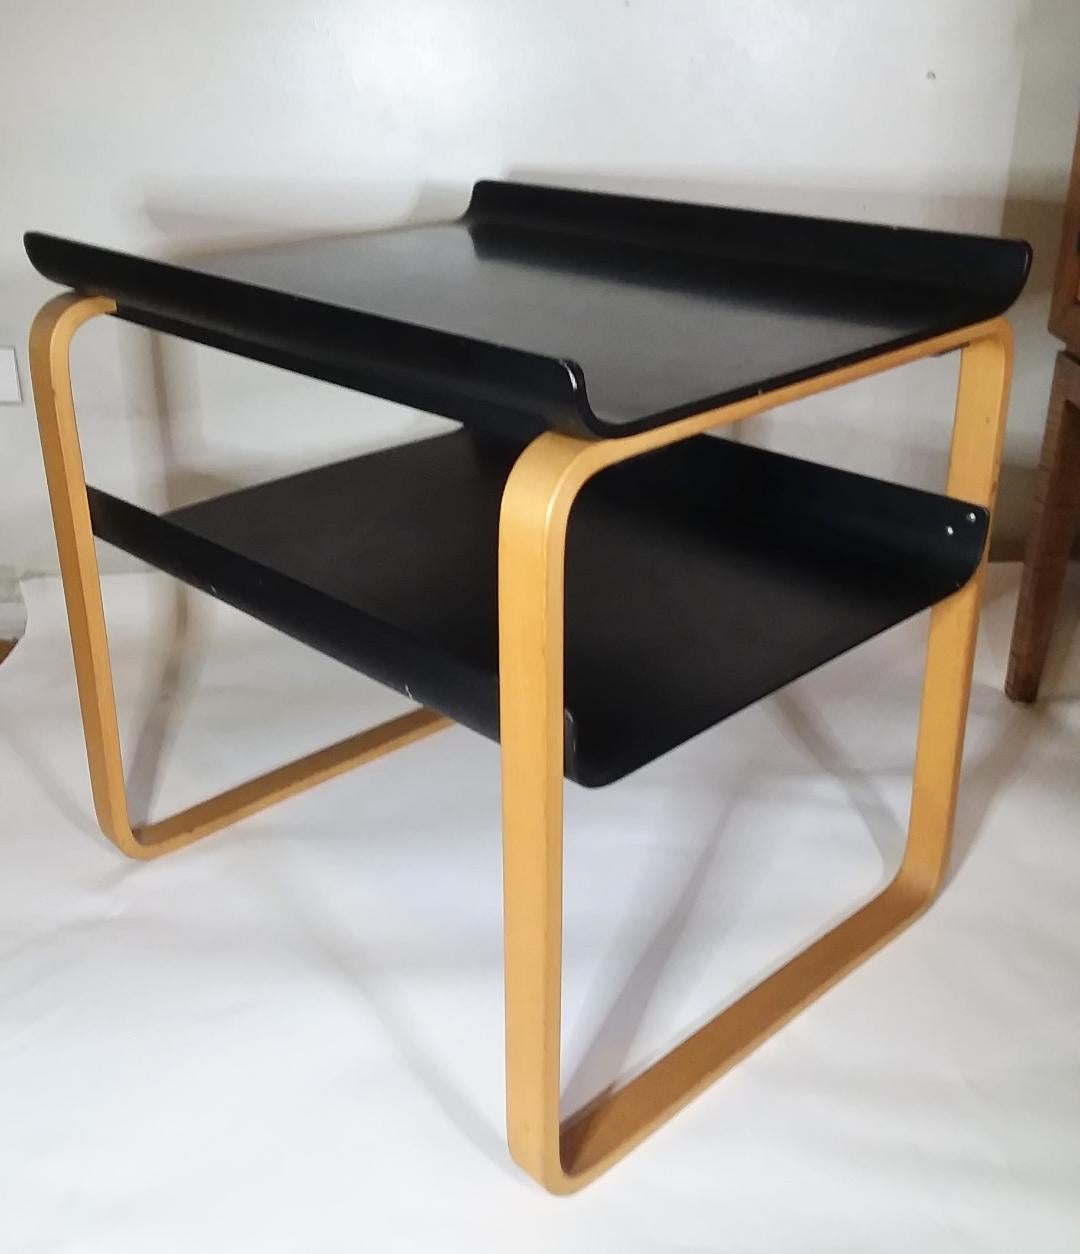 Elegant side table by Alvar Aalto, made from natural bent wood birch contrasting with black lacquer. Iconic design originally designed in 1932, originally for the Paimio Sanatorium in Finland. Table design 915.
Measures: 20.5